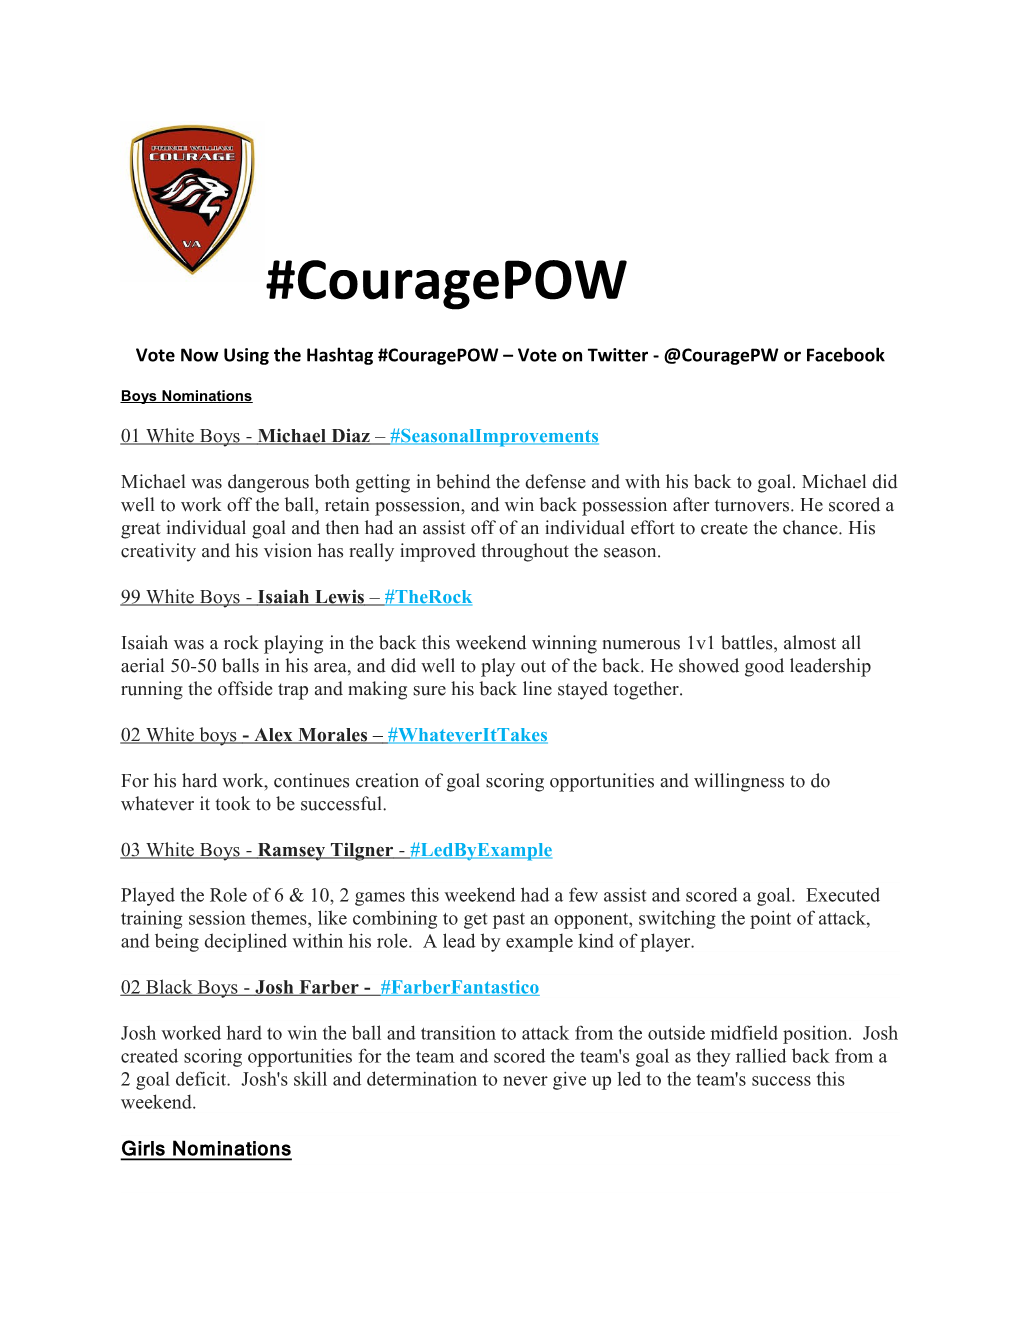 Vote Now Using the Hashtag #Couragepow Vote on Twitter - Couragepw Or Facebook